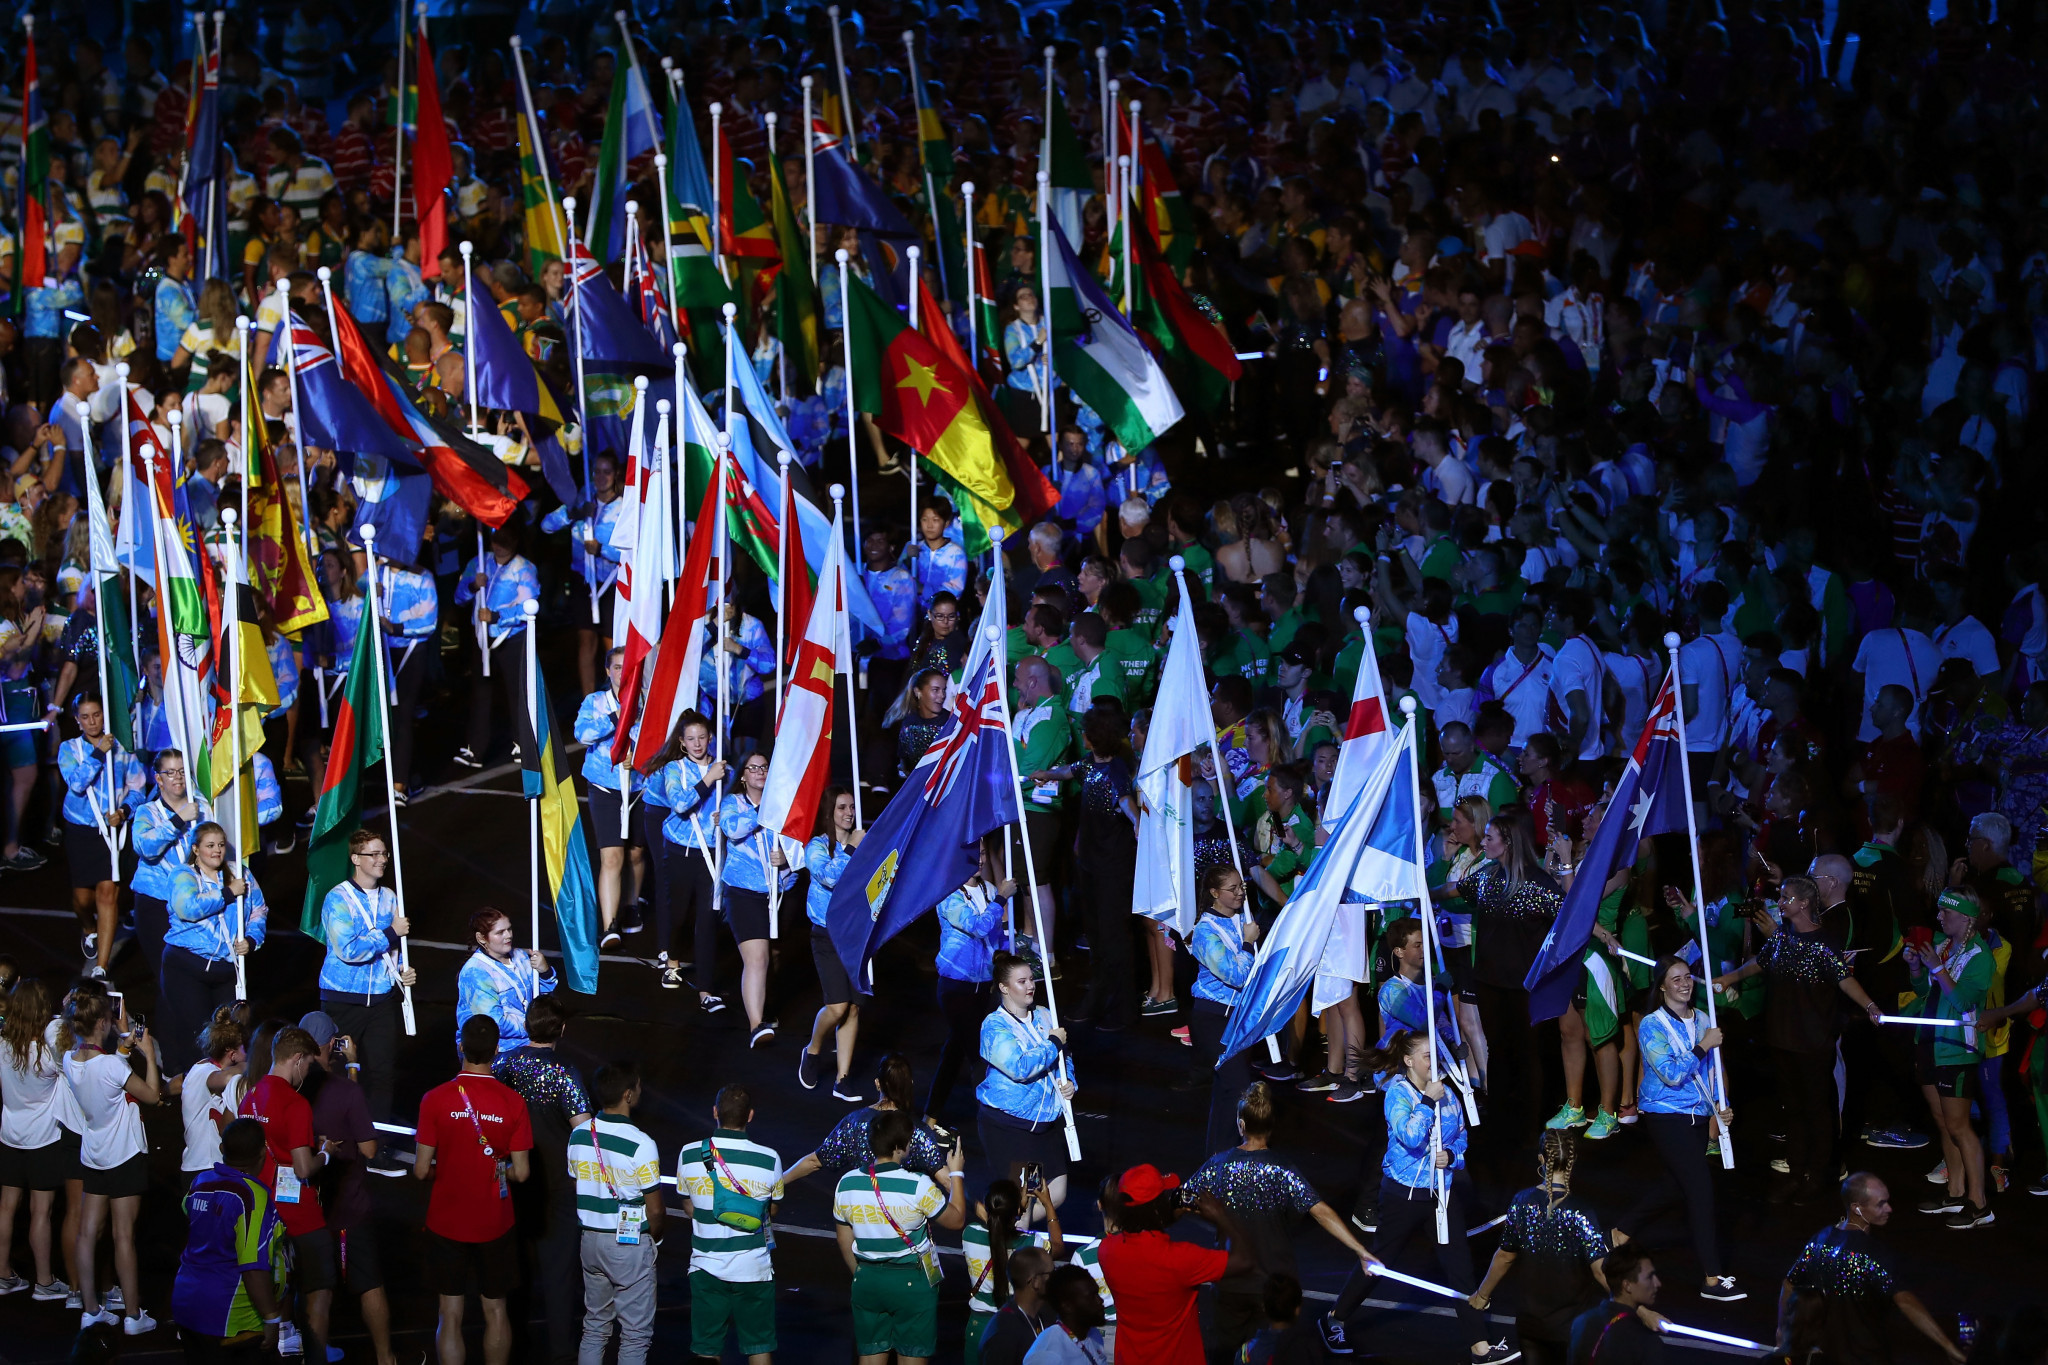 CGF to support athletes' "positive expressions of their values" at Commonwealth Games